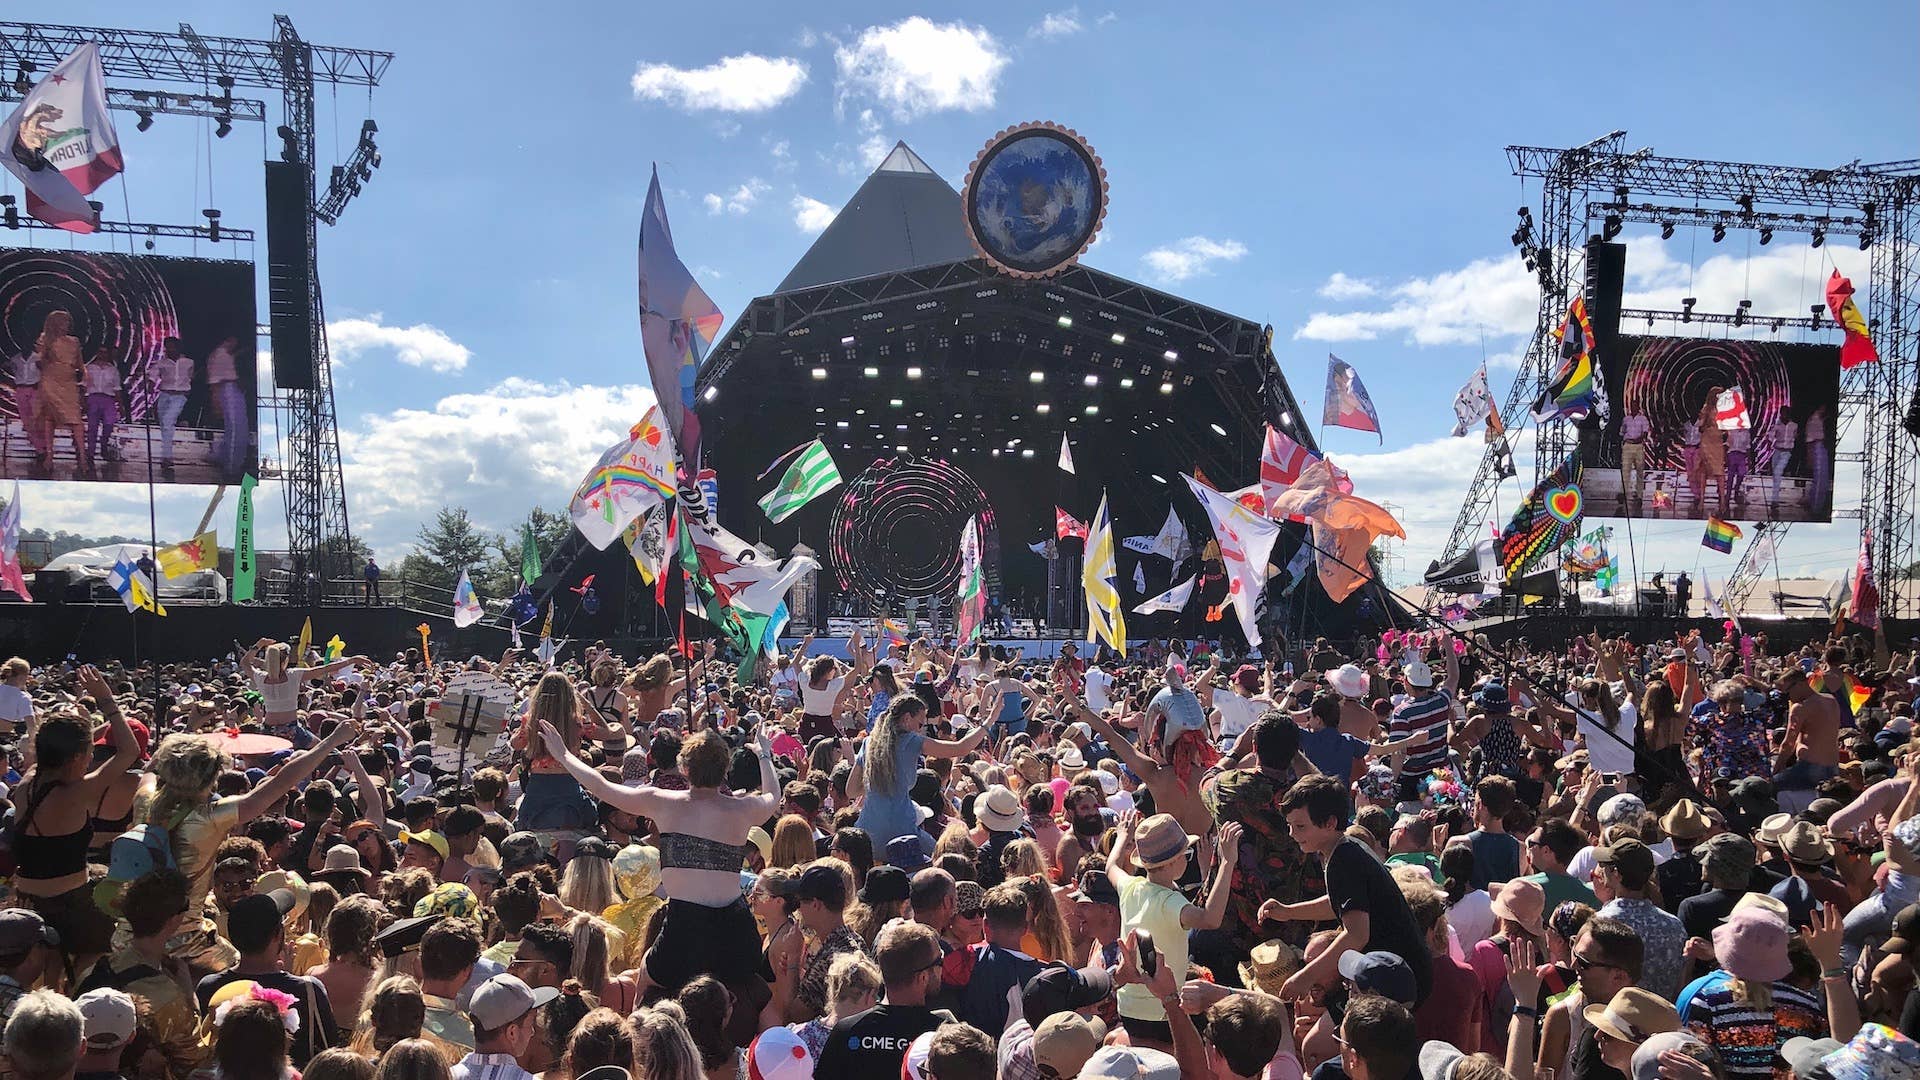 Crowds listen to Kylie perform on the Pyramid Stage at the 2019 Glastonbury Festival